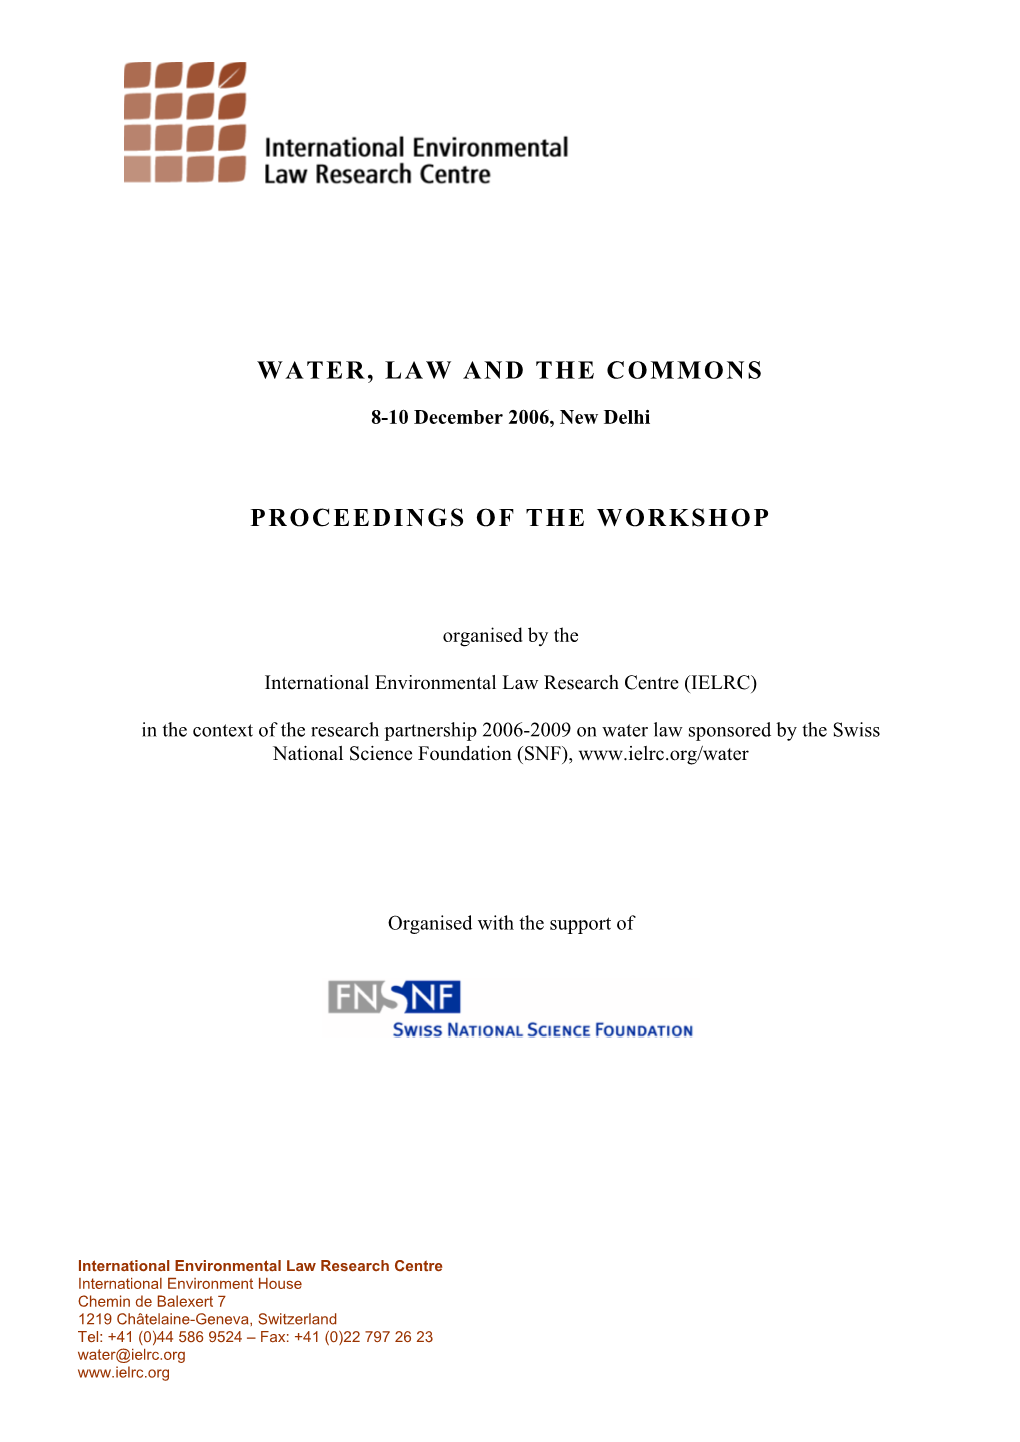 Water, Law and the Commons Proceedings of The